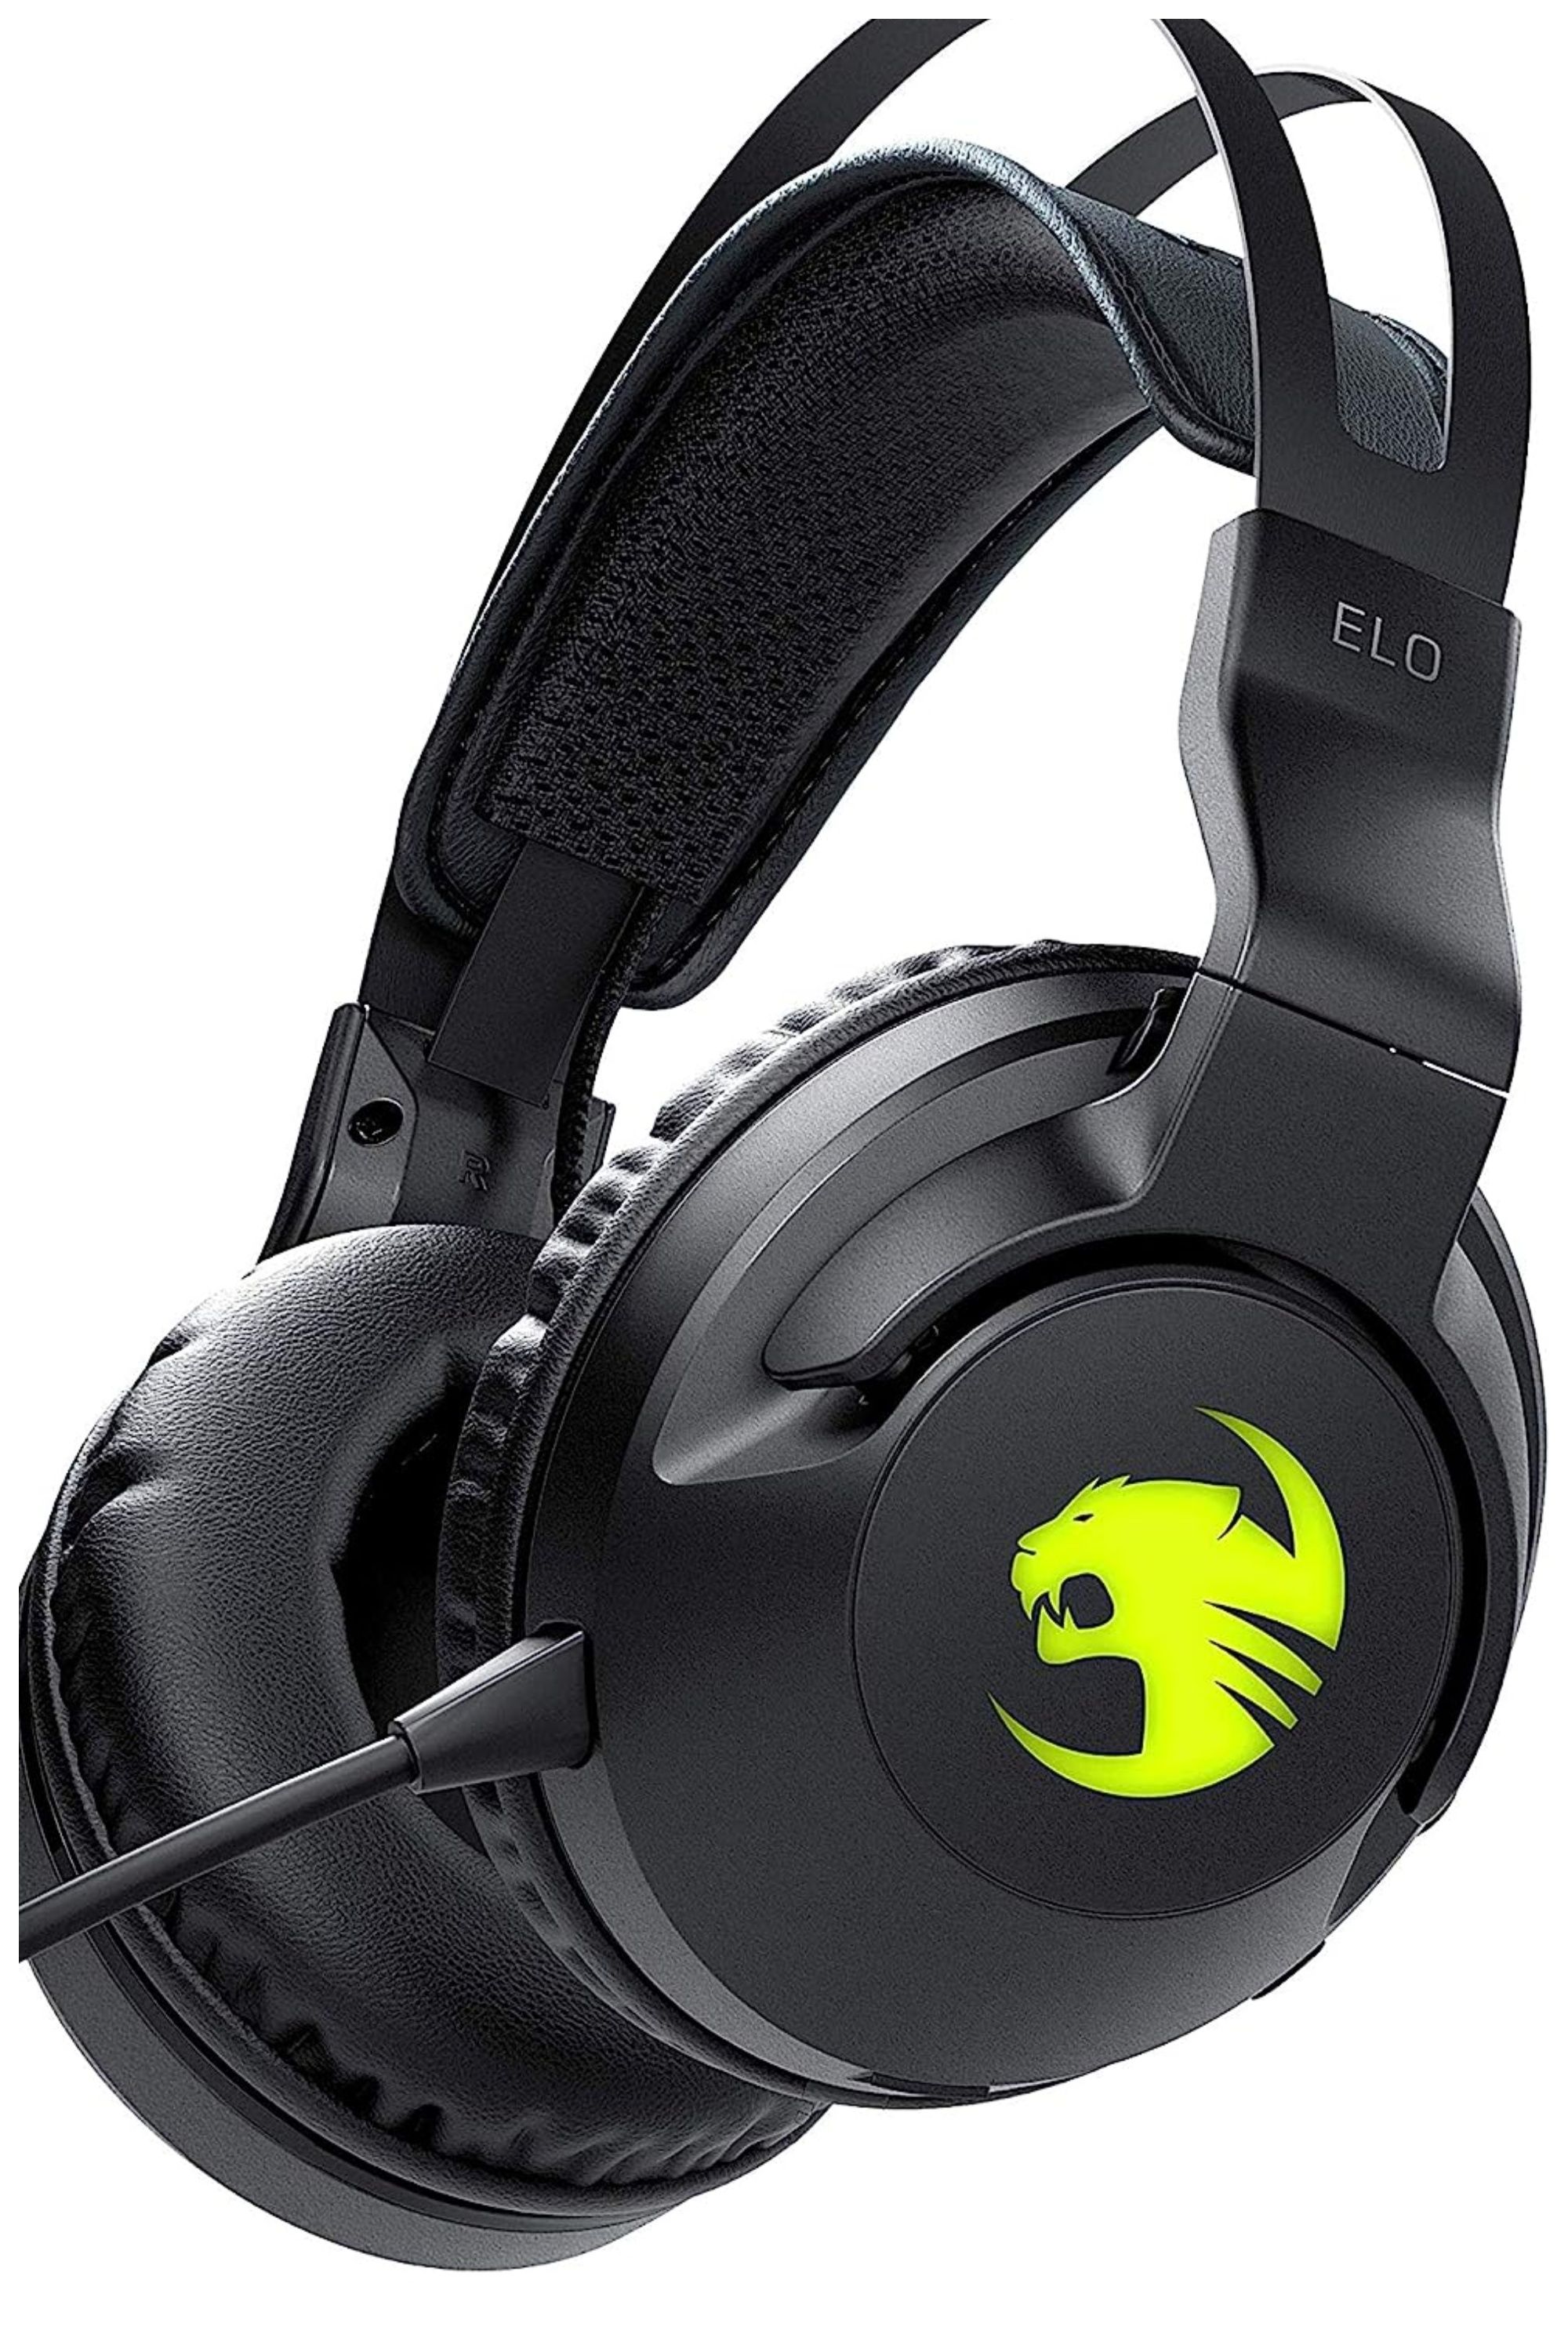 Roccat Elo 7.1 Air wireless gaming headset